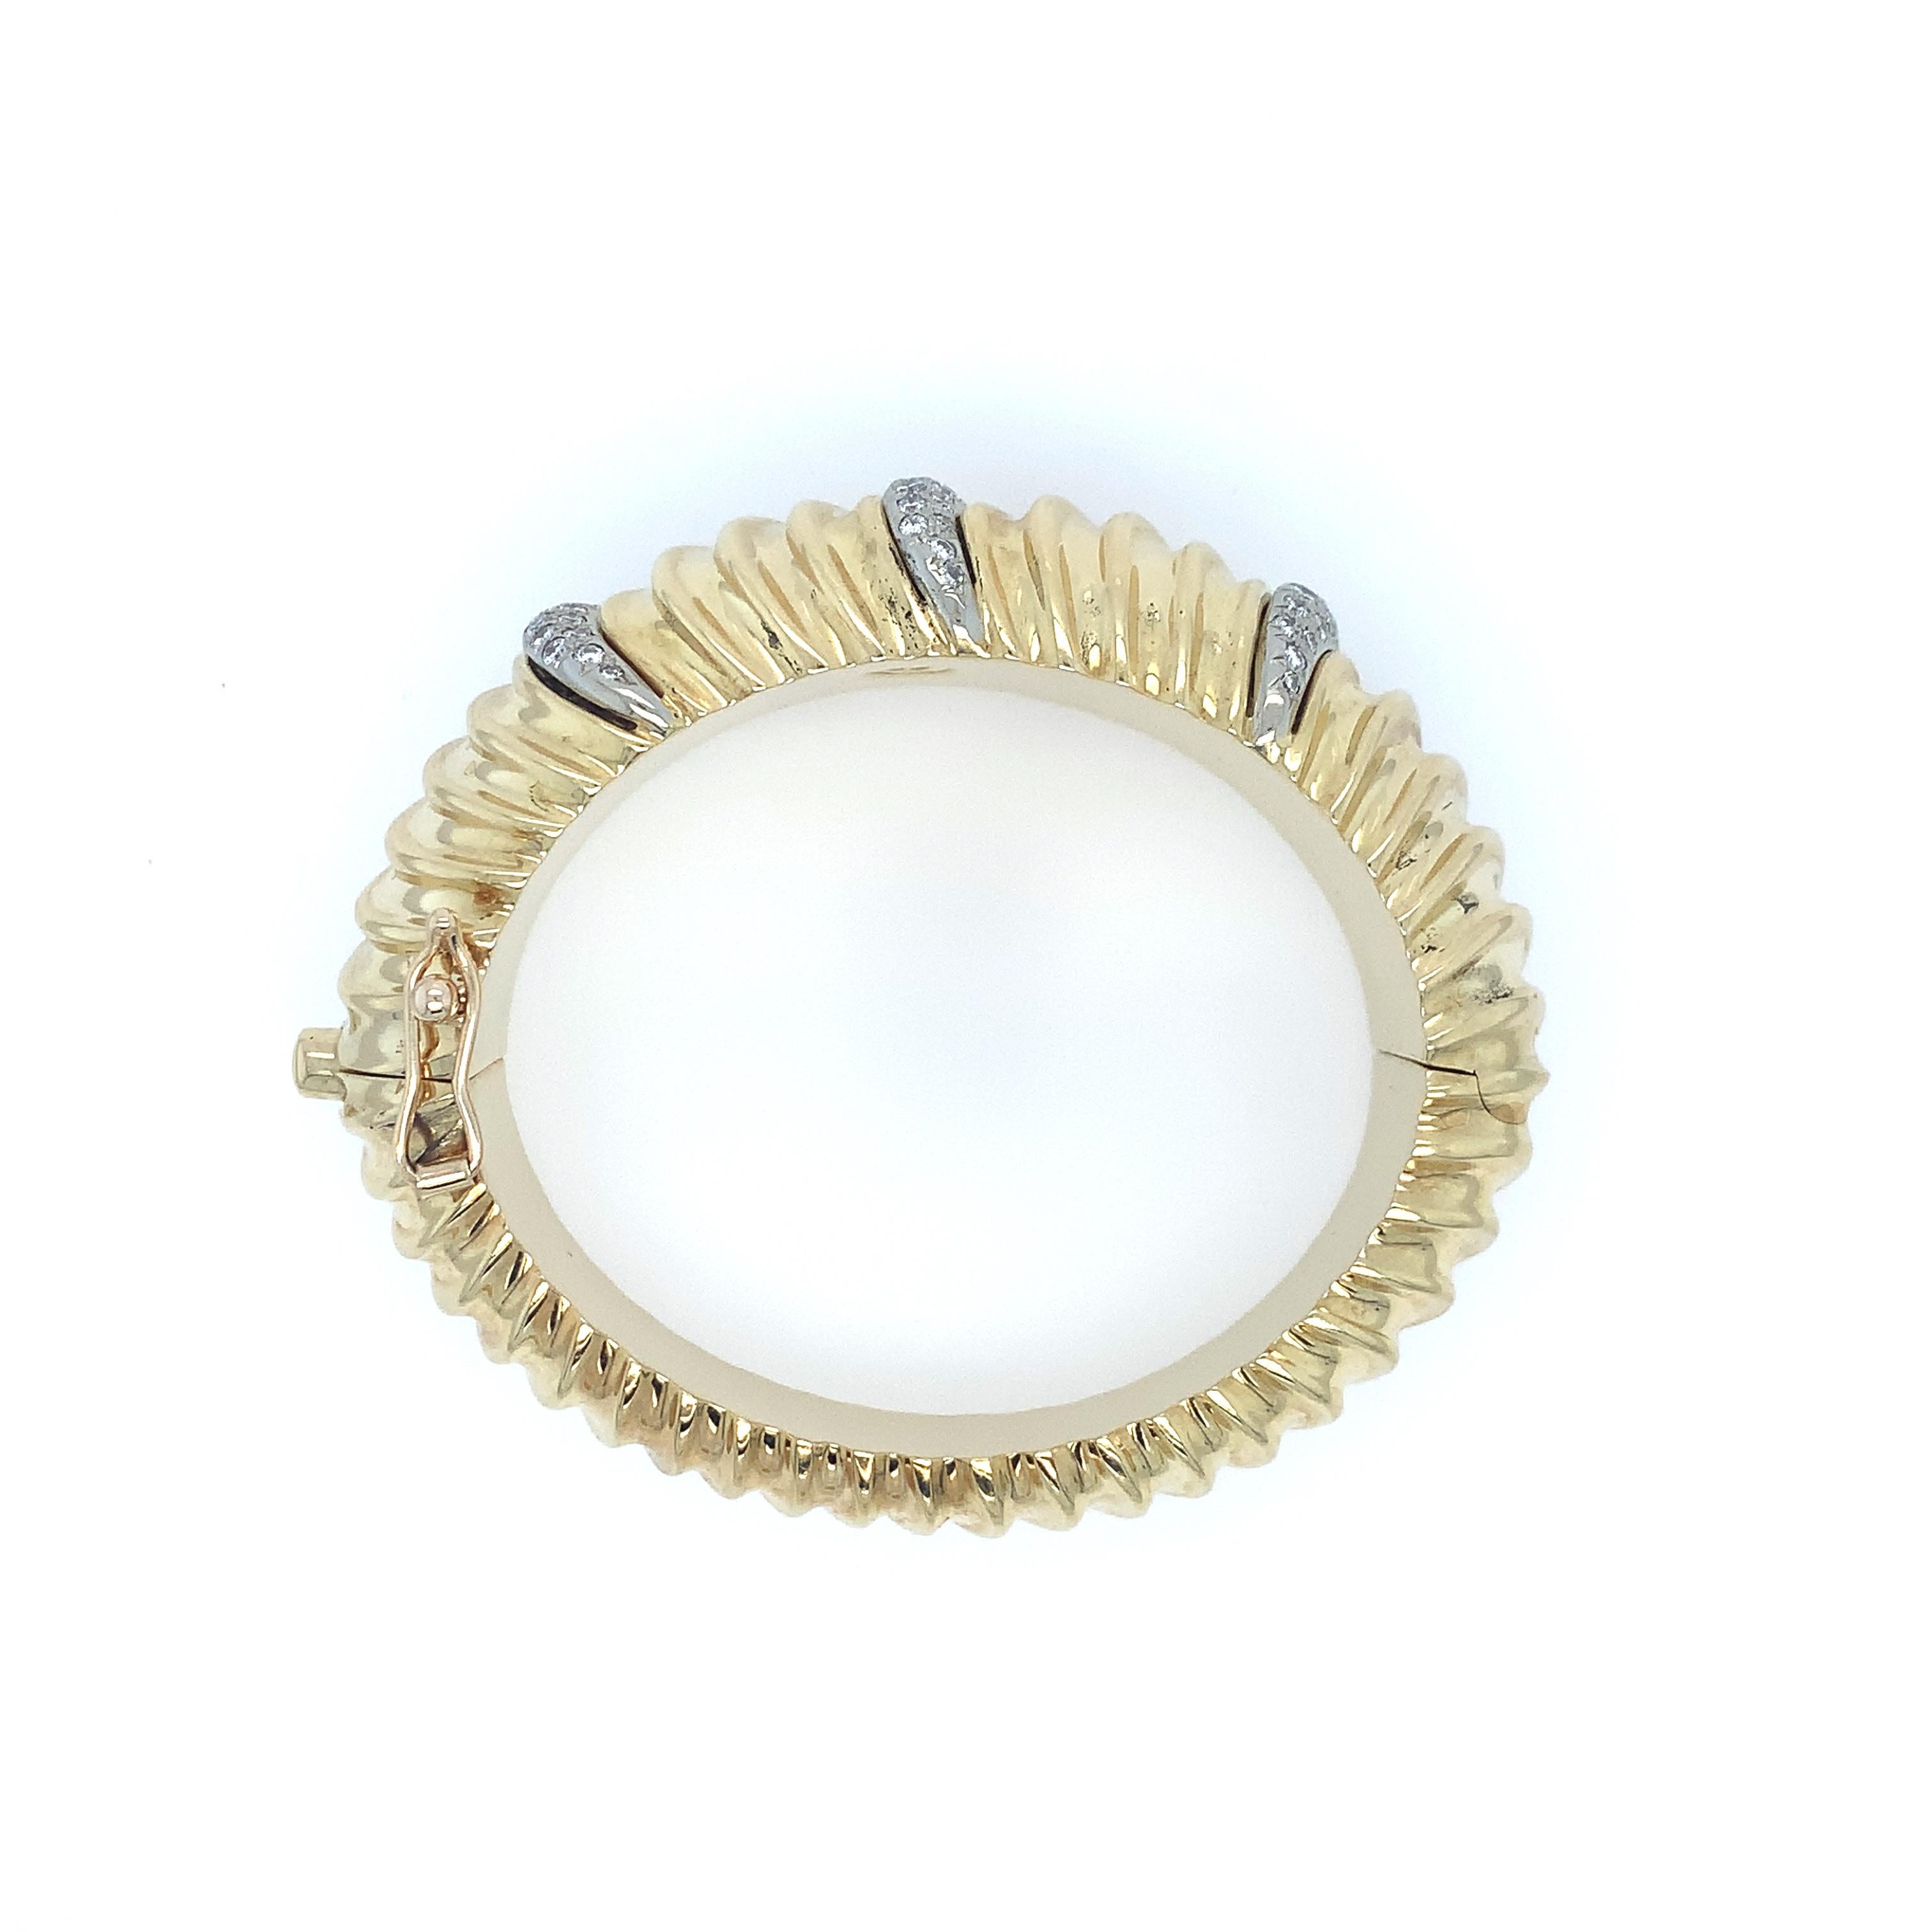 A fabulous piece by the artist and jeweler Ruth Satsky. Manufactured in the late twentieth century, this piece is simply one of a kind. Made of polished solid gold, this oval shaped bangle bracelet is designed with a scalloped pattern tapering down